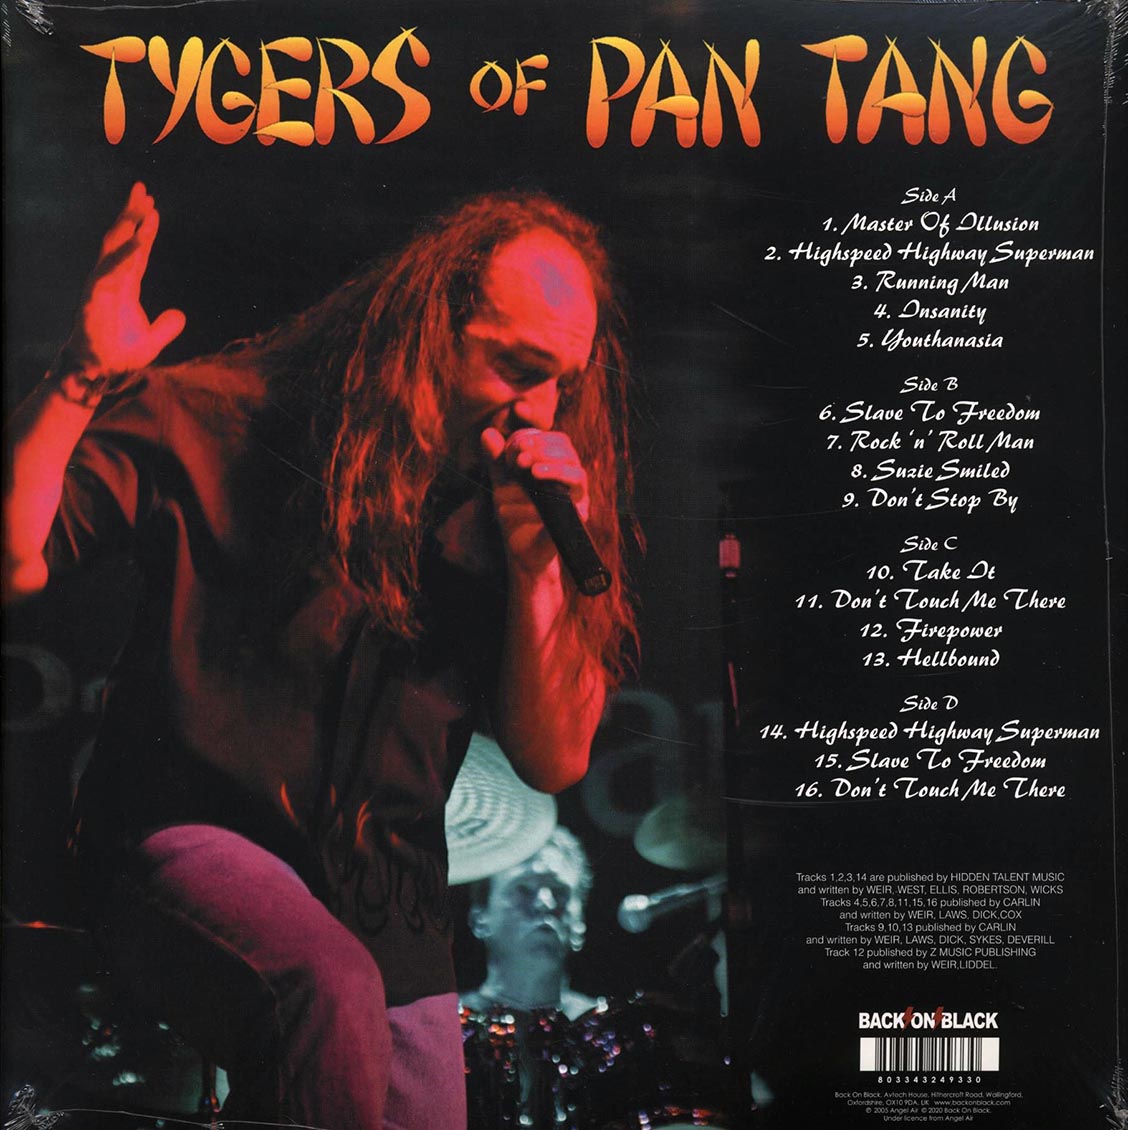 Tygers of Pan Tang - Leg of the Boot - Live in Holland [2020 Reissue] [New Double Vinyl Record LP]